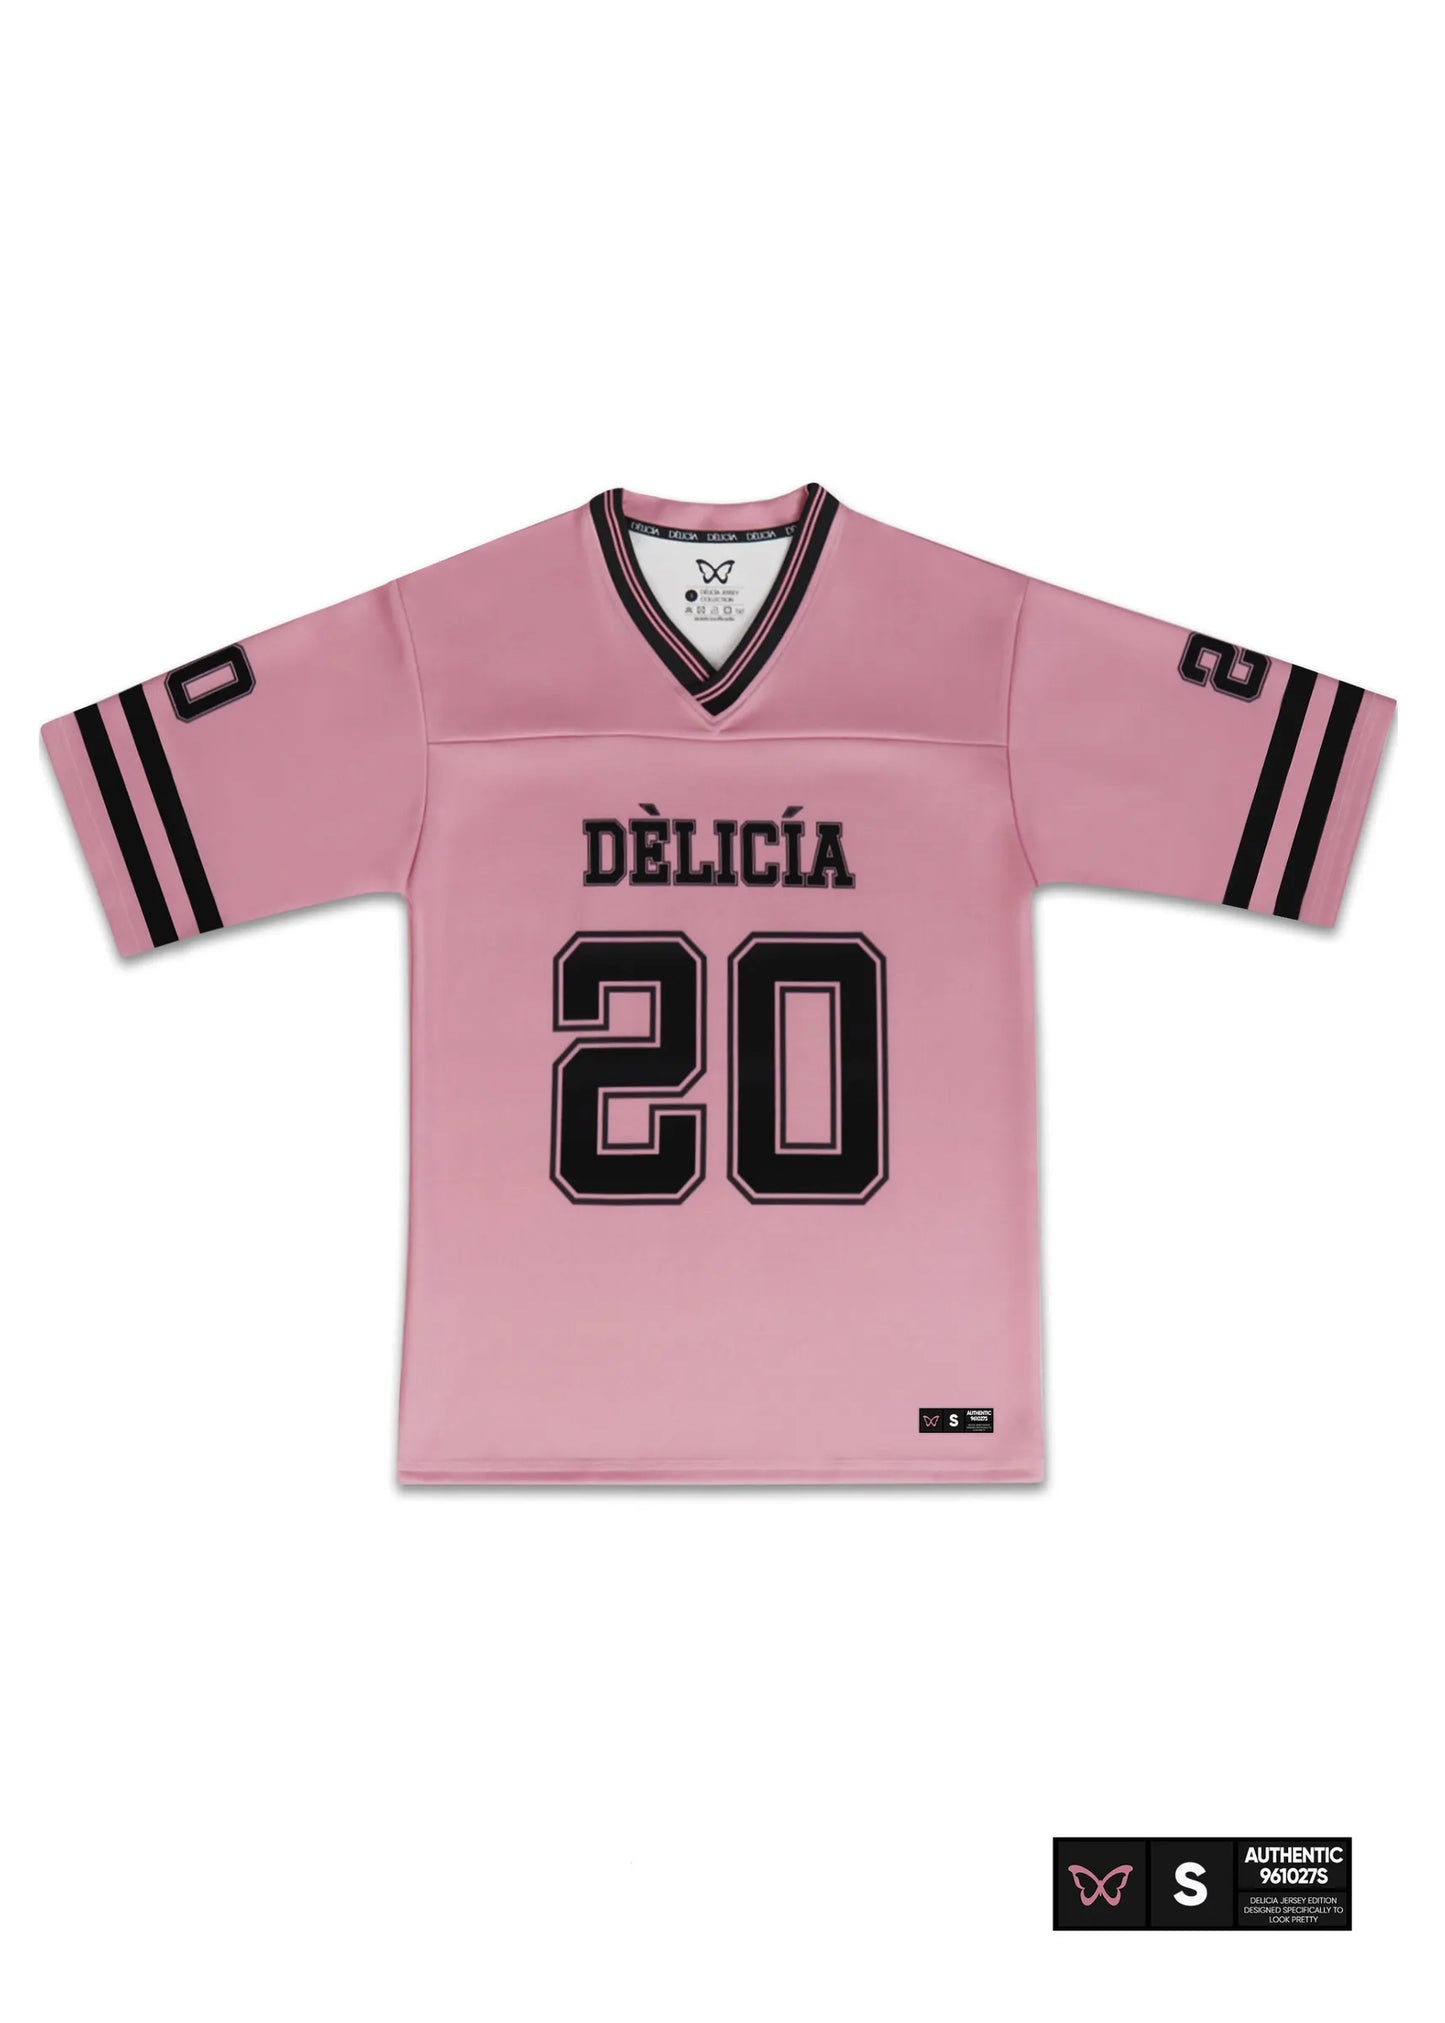 Jersey "20" Edition in Rosewood Pink